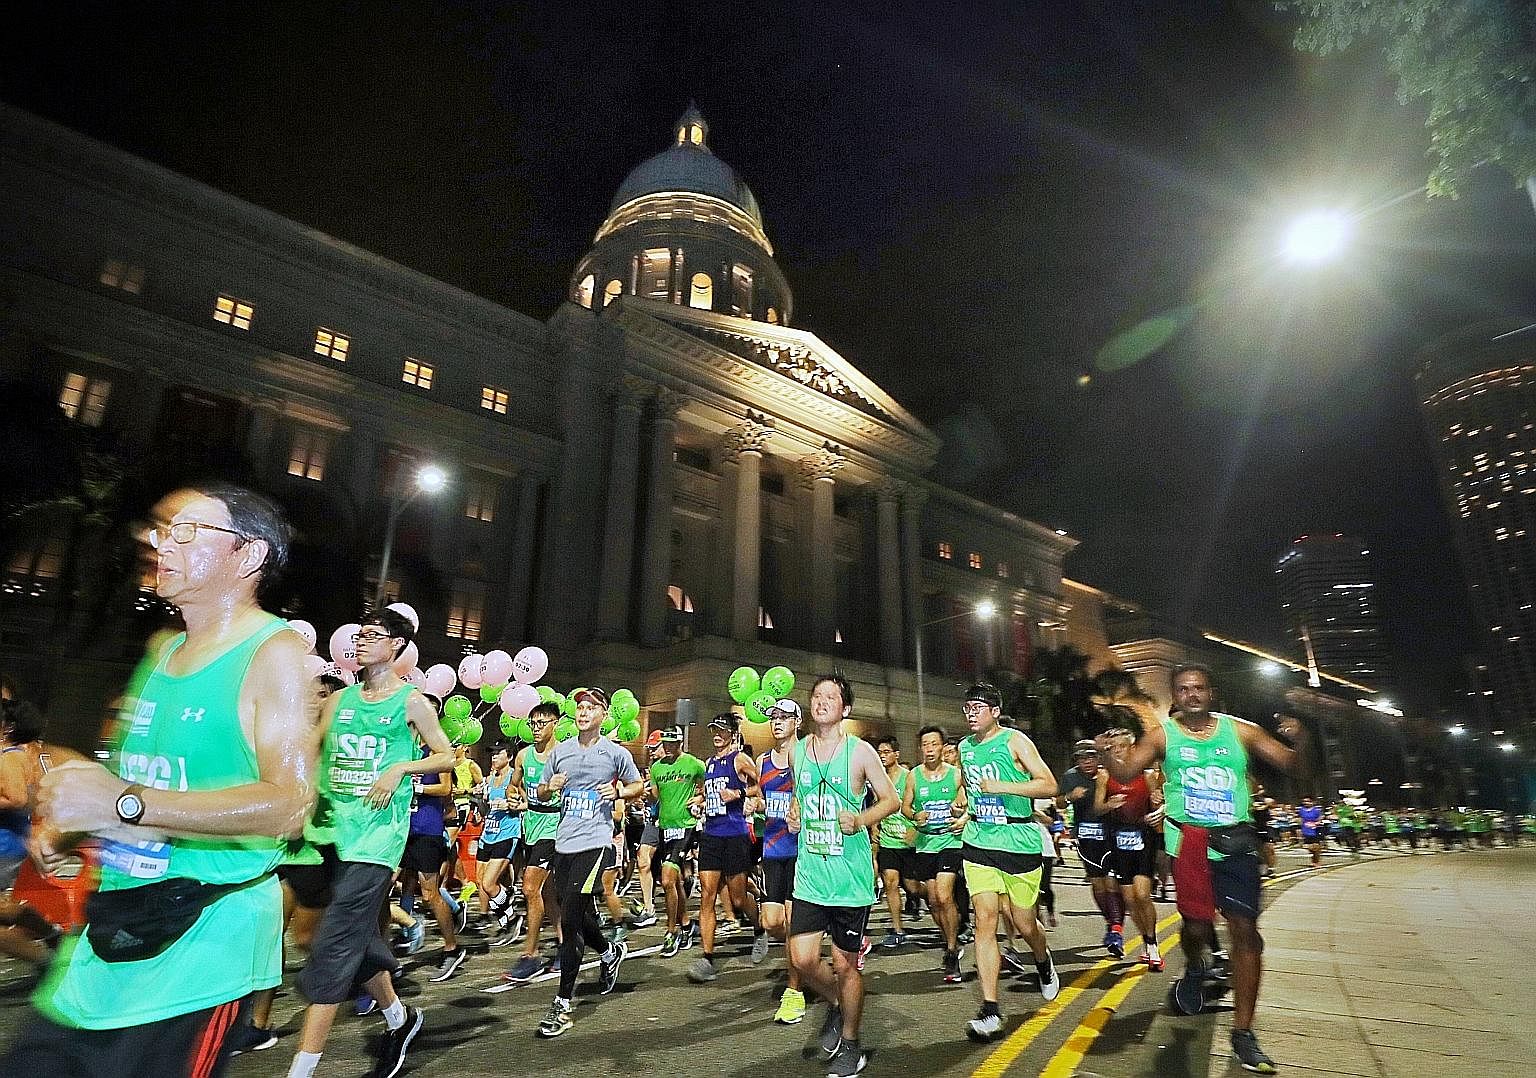 Runners made their way past the National Gallery yesterday as the city centre came alive at dawn with more than 30,000 enthusiasts pounding the streets during the Standard Chartered Singapore Marathon. The event, now into its 17th edition, attracted 